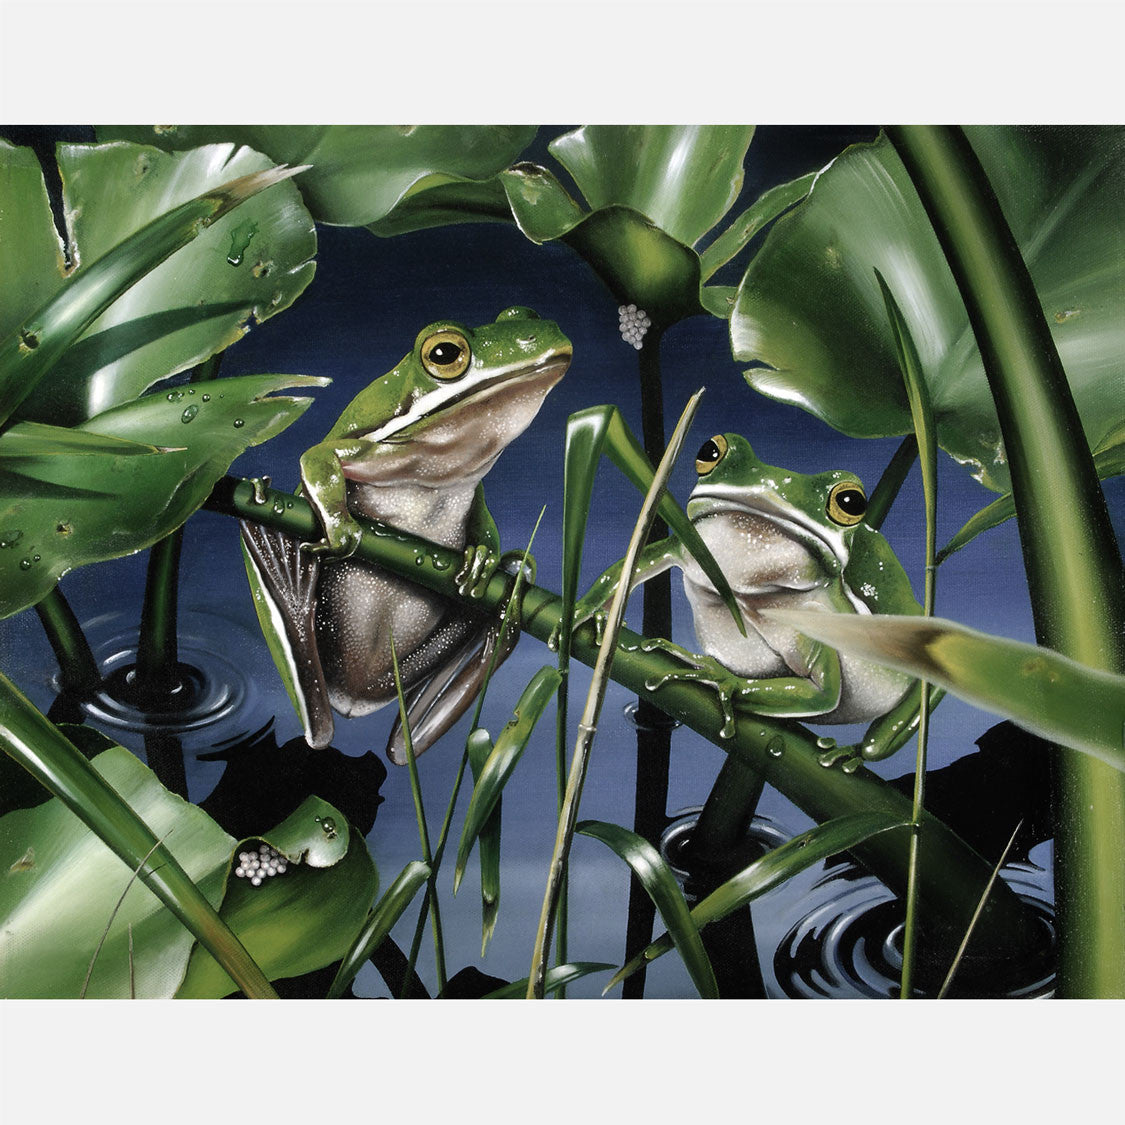 This beautiful oil painting is of a pair of green tree frogs on spatterdock, a floating freshwater plant.